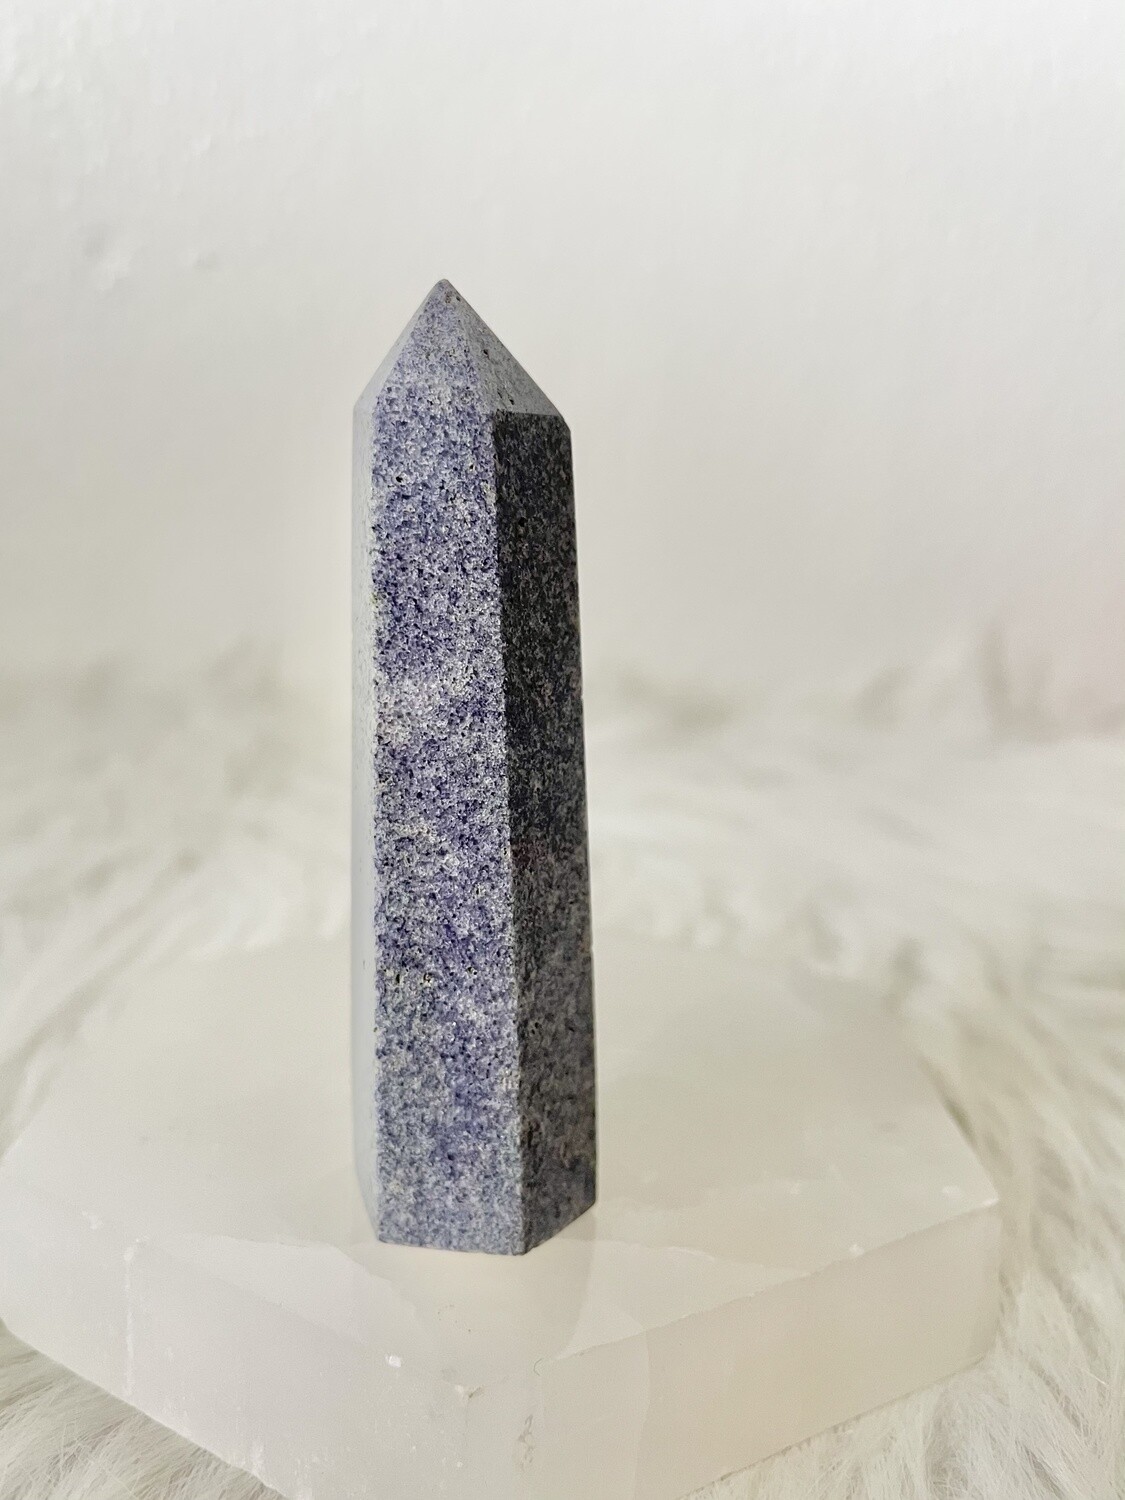 Self-Confidence Blue Aragonite Tower